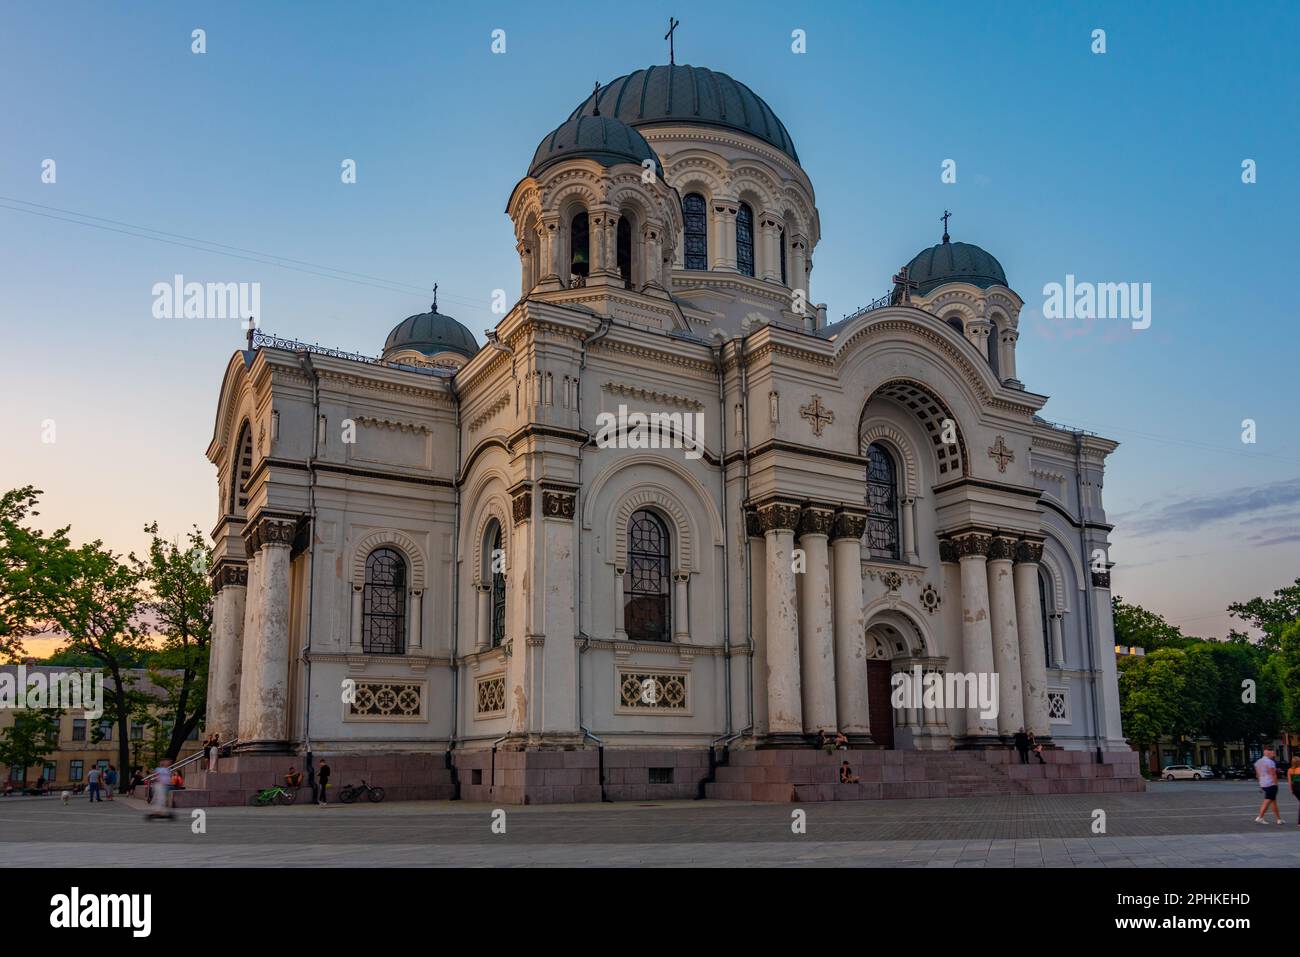 St. Michael the Archangel's Church in Kaunas, Lithuania. Stock Photo